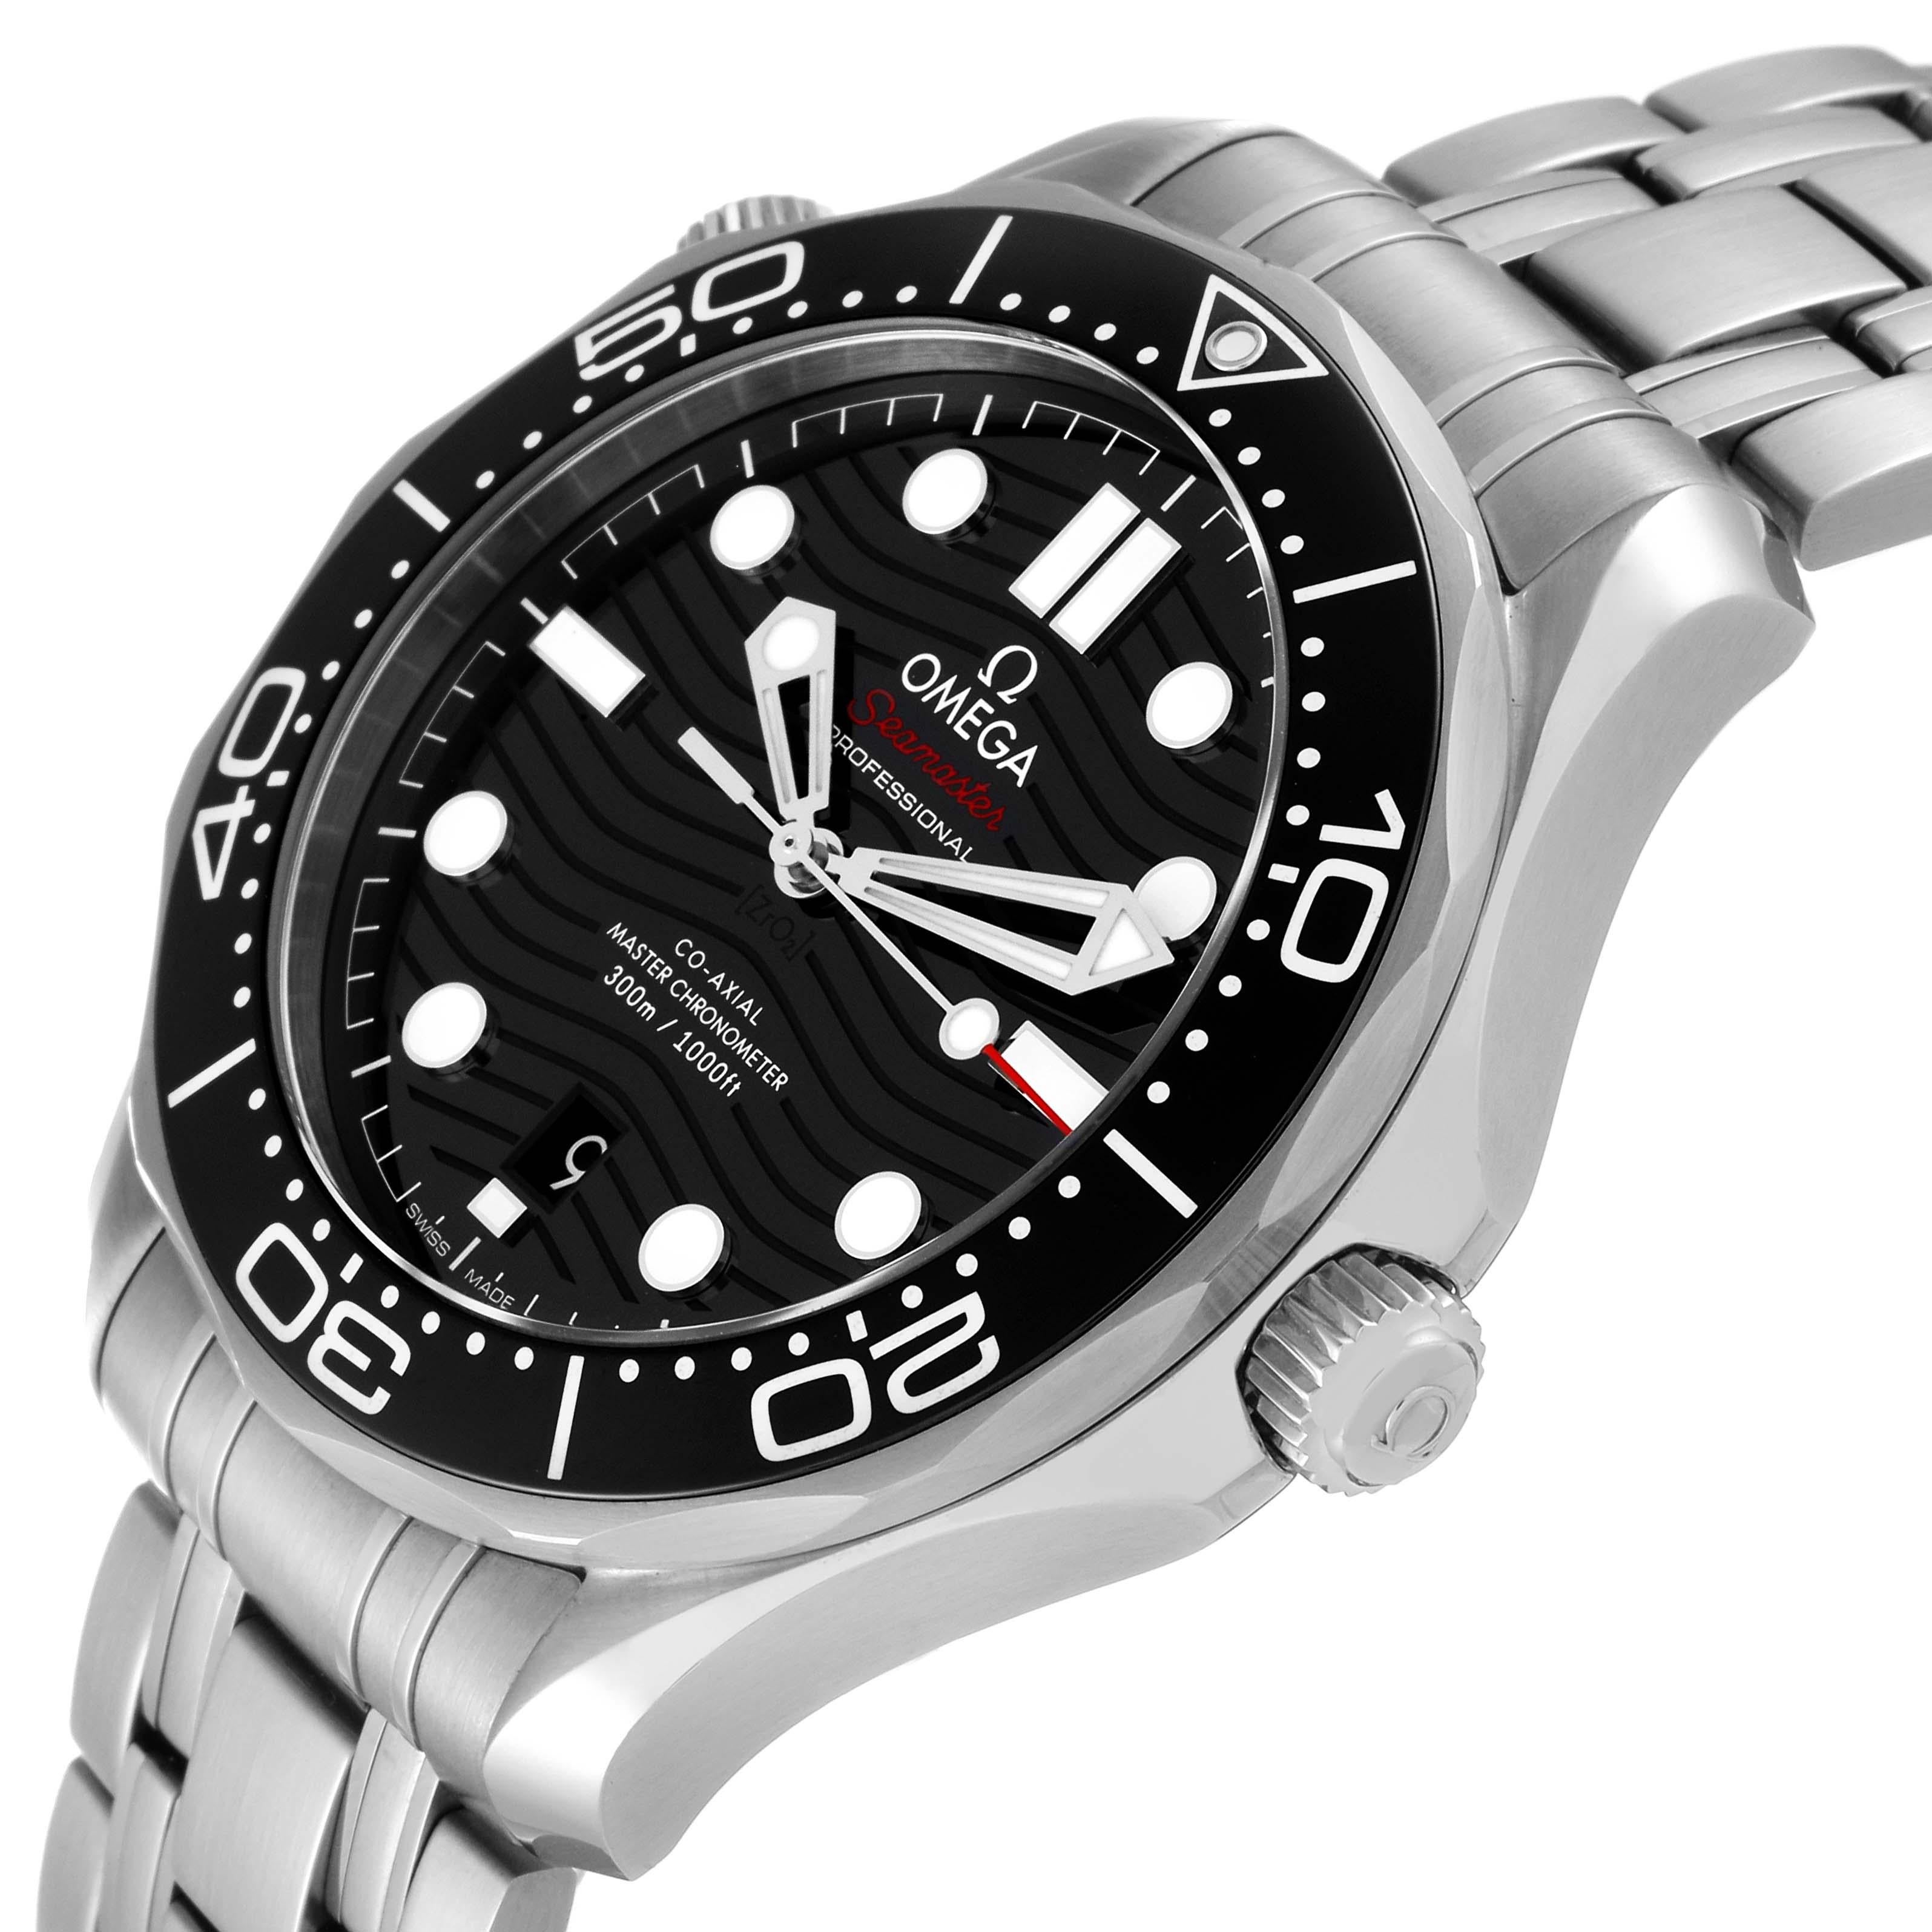 Omega Seamaster Diver 300M Steel Mens Watch 210.30.42.20.01.001 Box Card 1